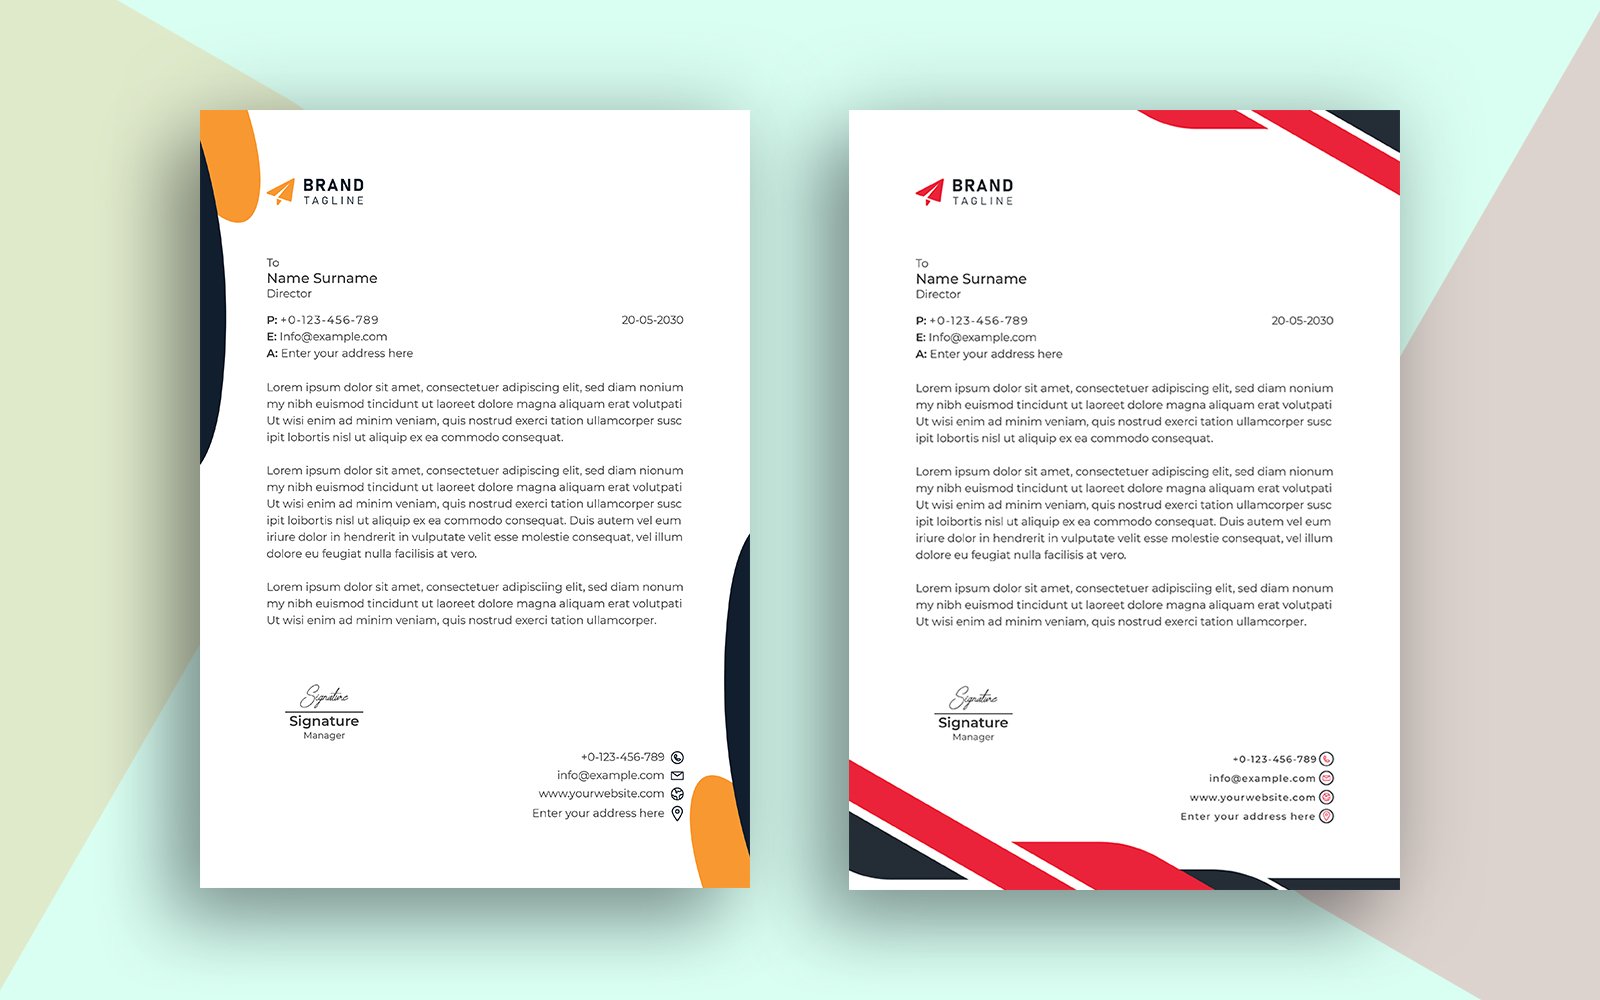 Template #247020 Corporate Document Webdesign Template - Logo template Preview